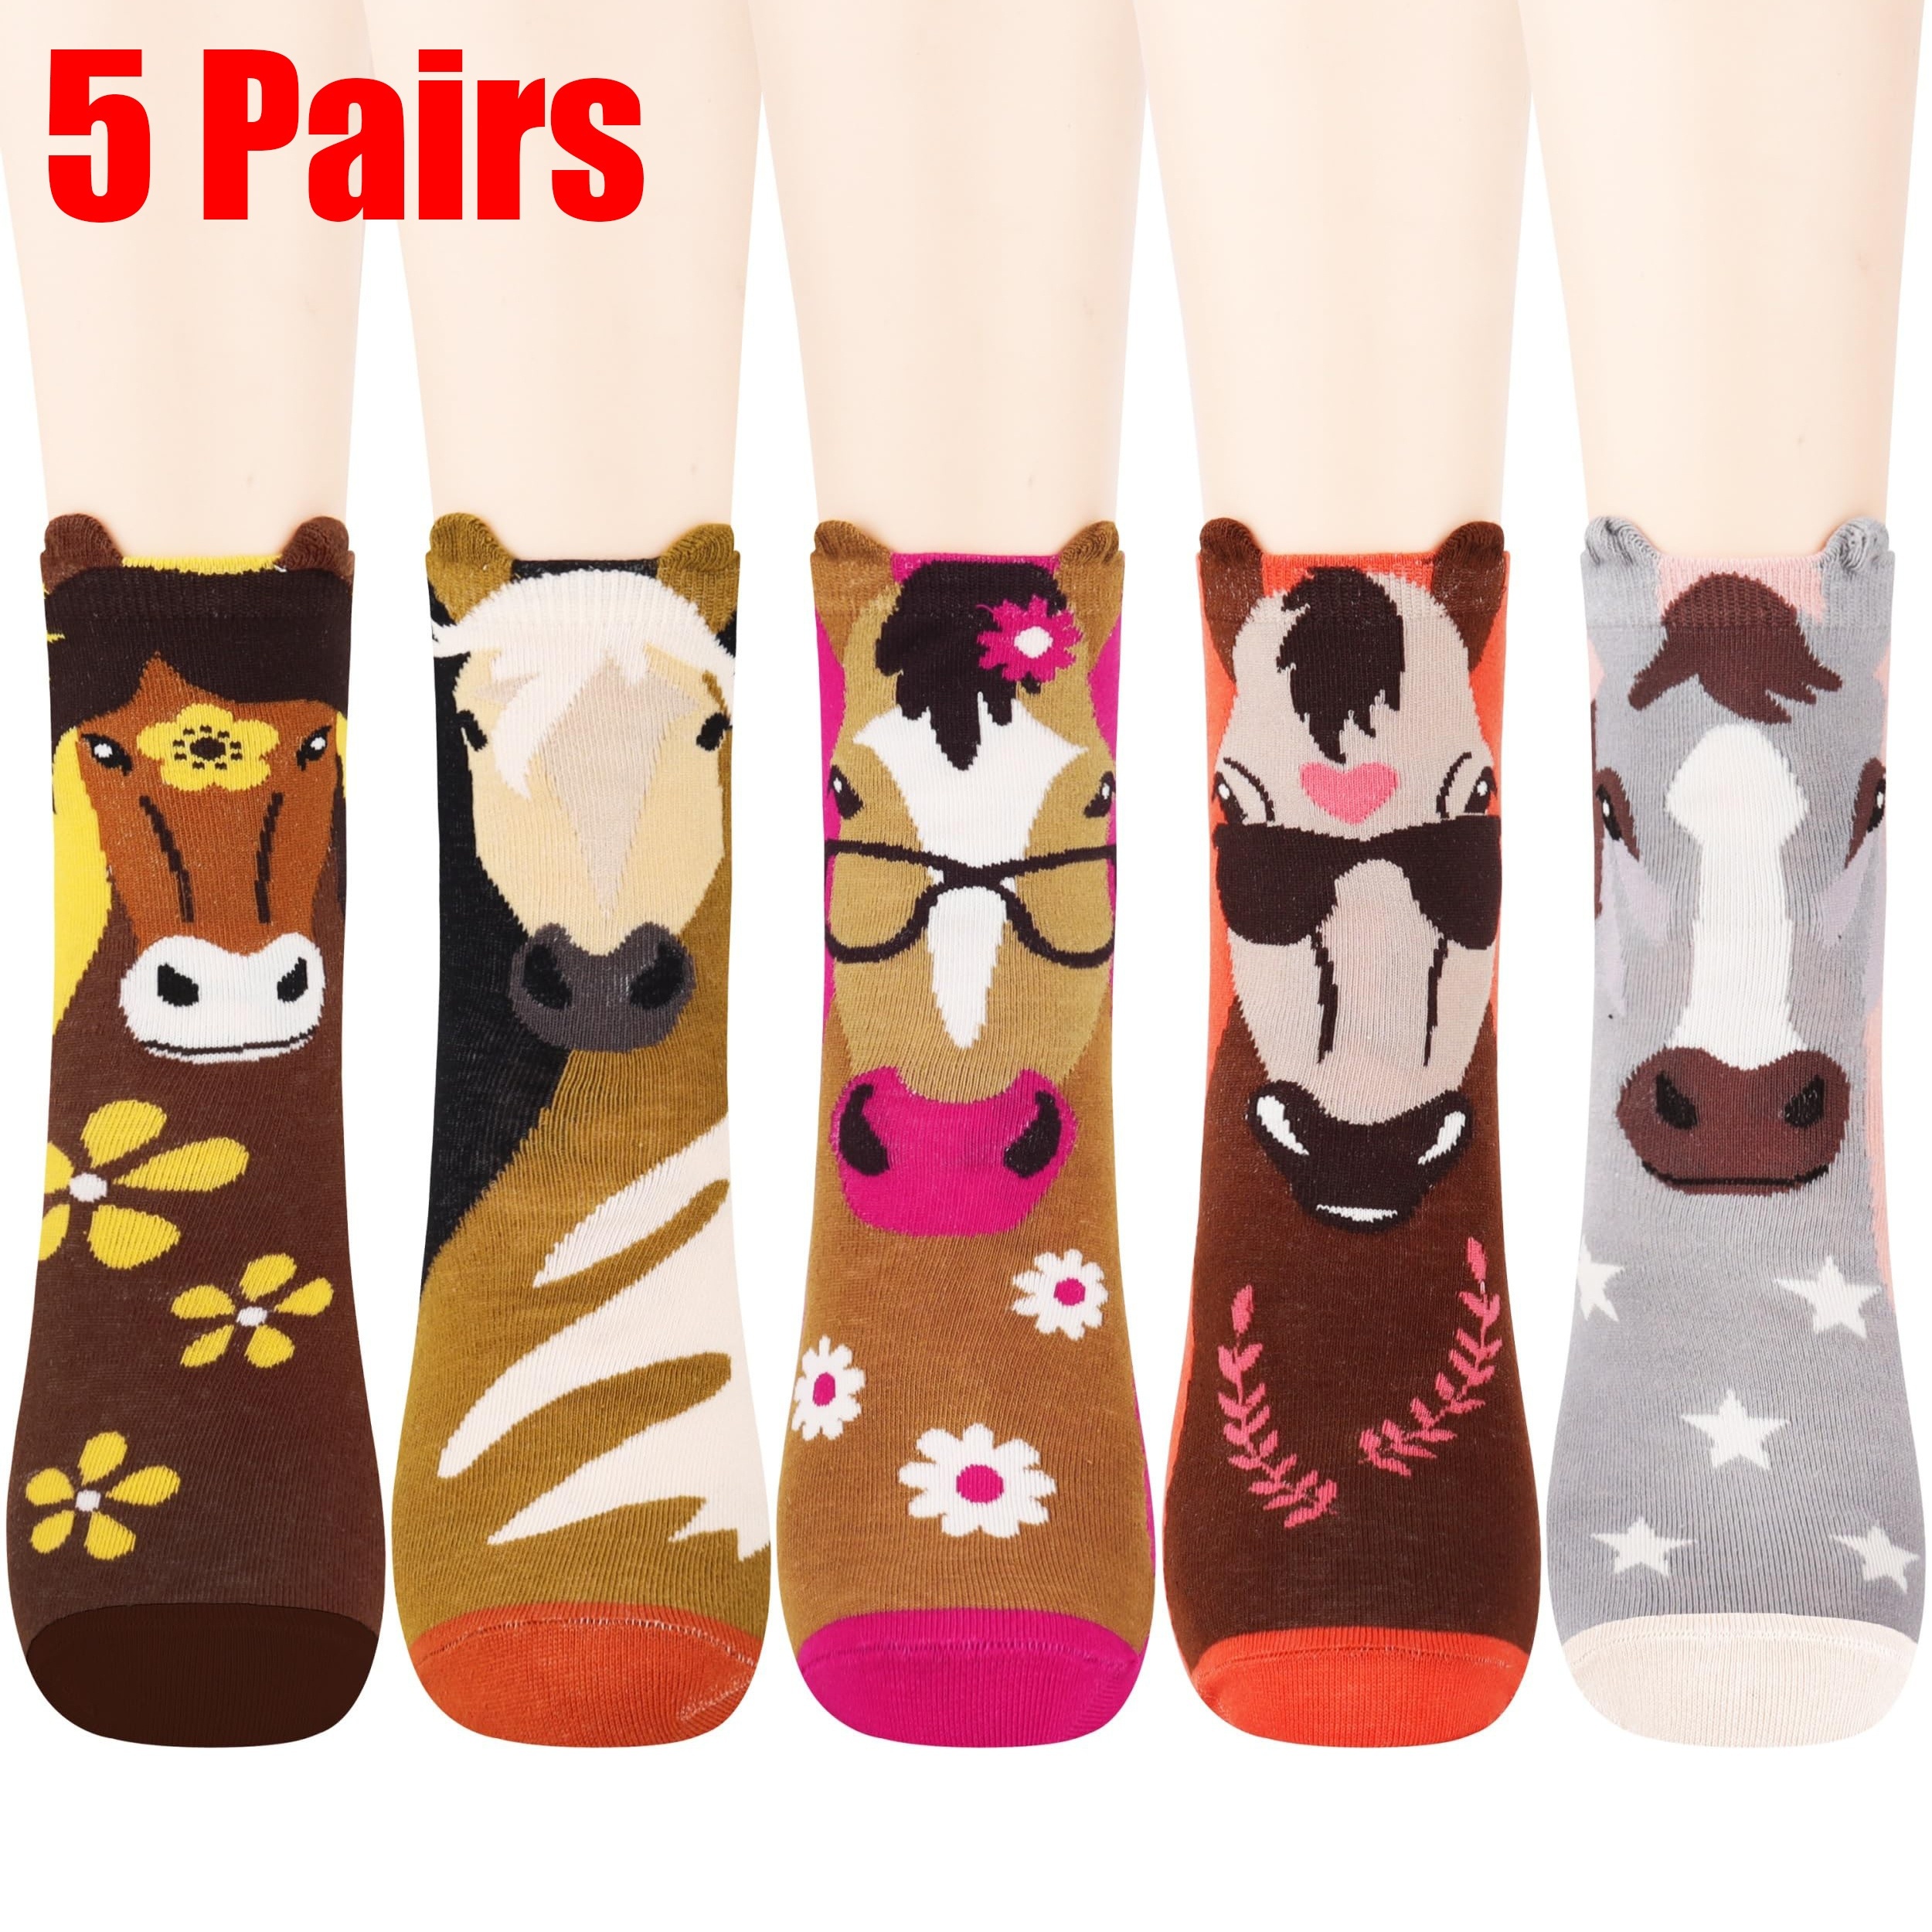 

5 Pairs Women's Creative Horse Pattern Socks Horse Gifts For Women Mom, Animal Socks Cute Christmas Gifts